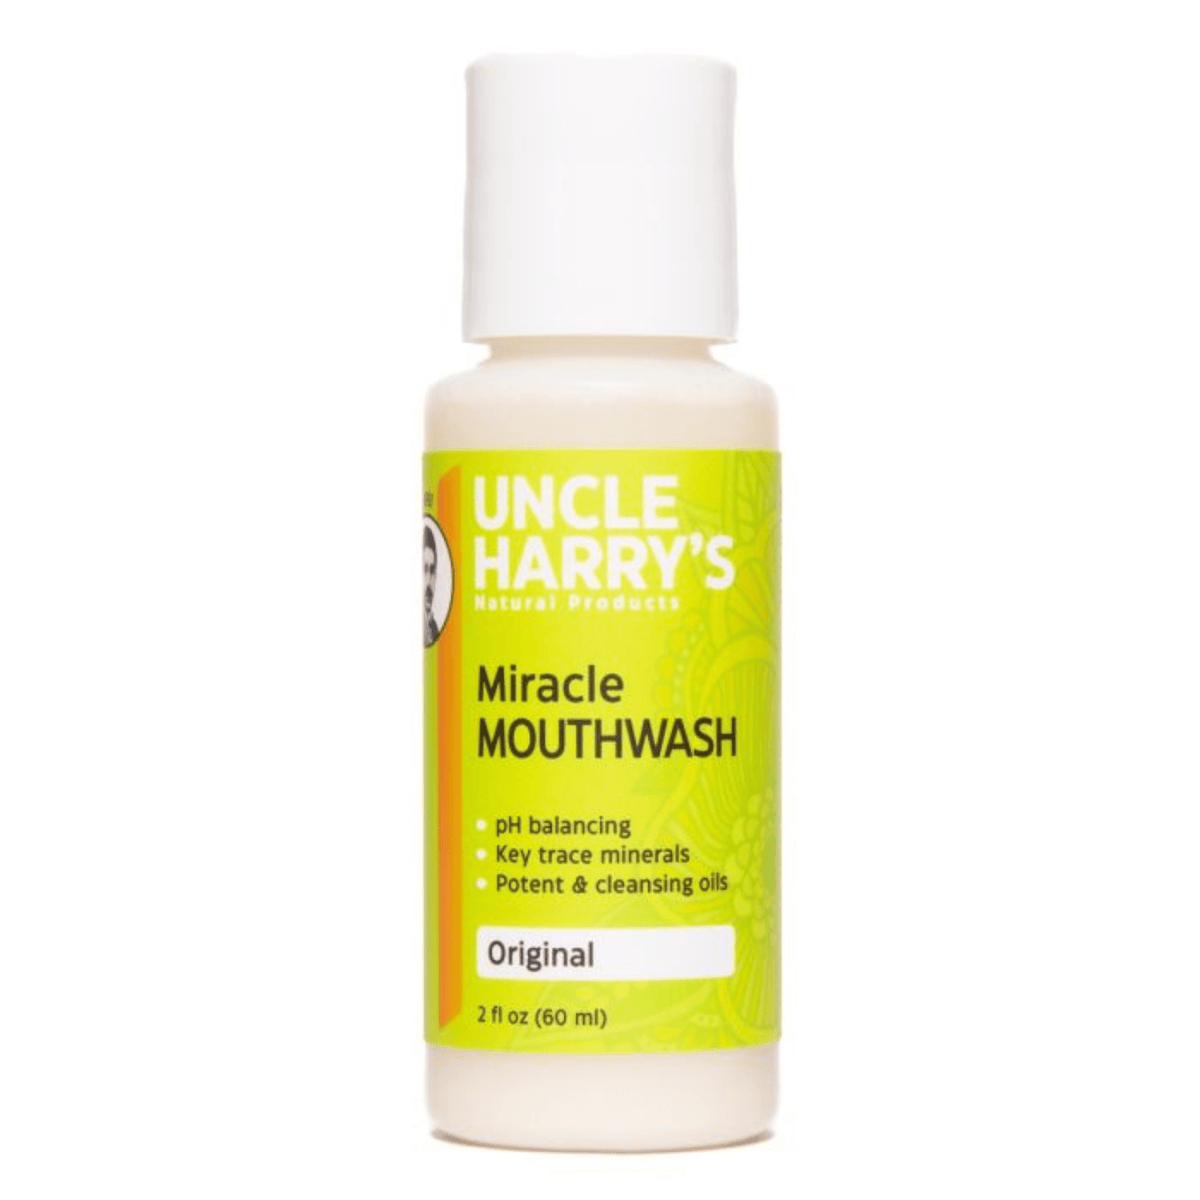 Primary Image of Miracle Mouthwash